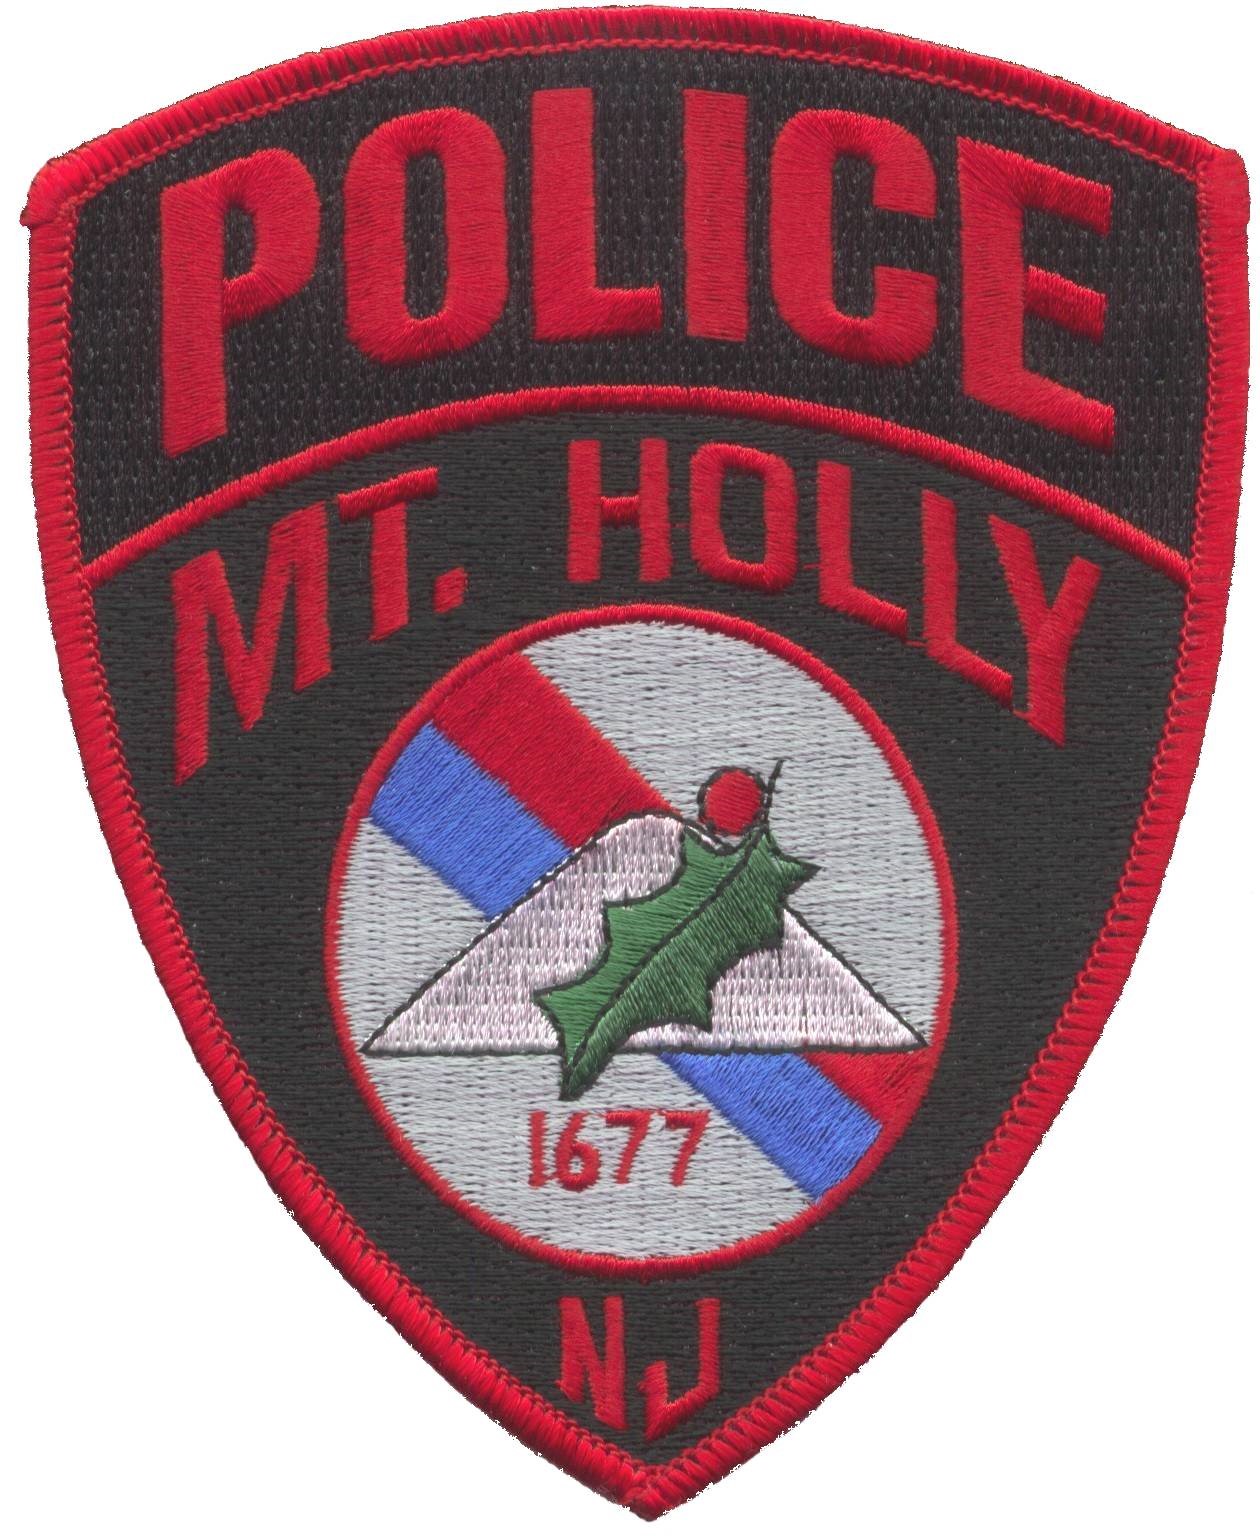 Mount Holly Police Department, NJ 